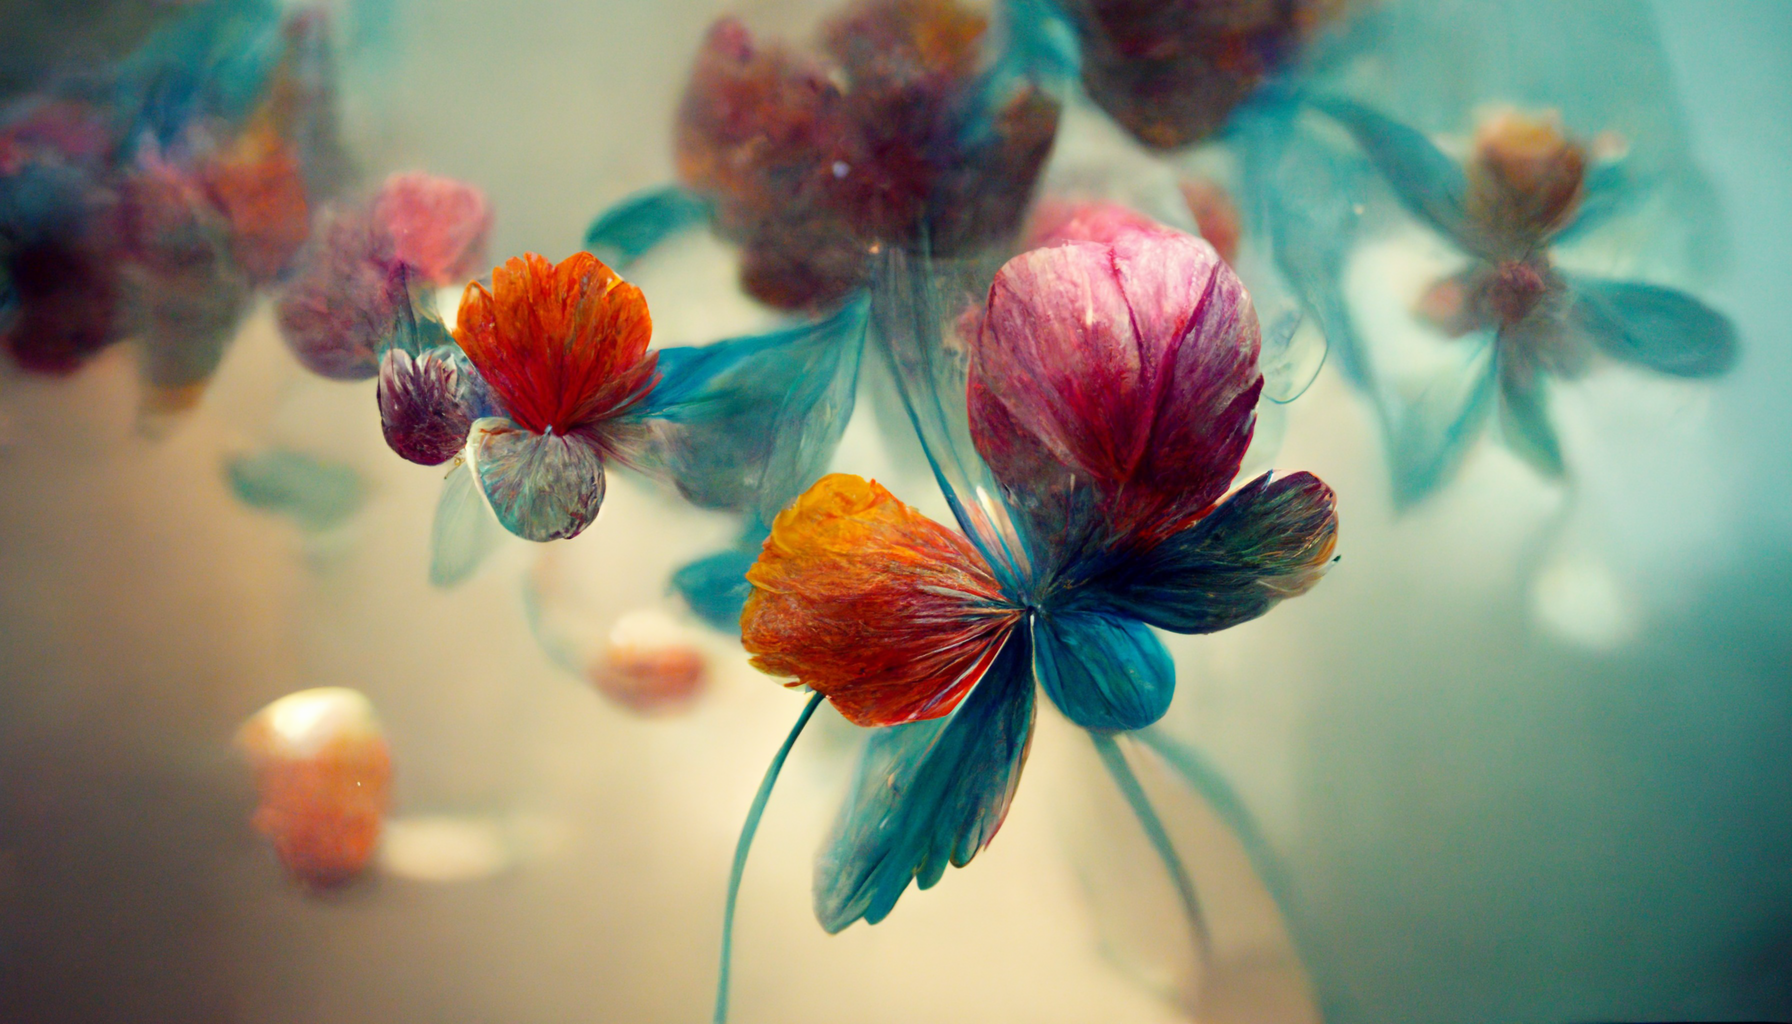 JF_beautiful_glass_flowers_colorful__minimalist_poetic_style_6debc288-c871-4c8a-bd4b-17152f6a0138.png